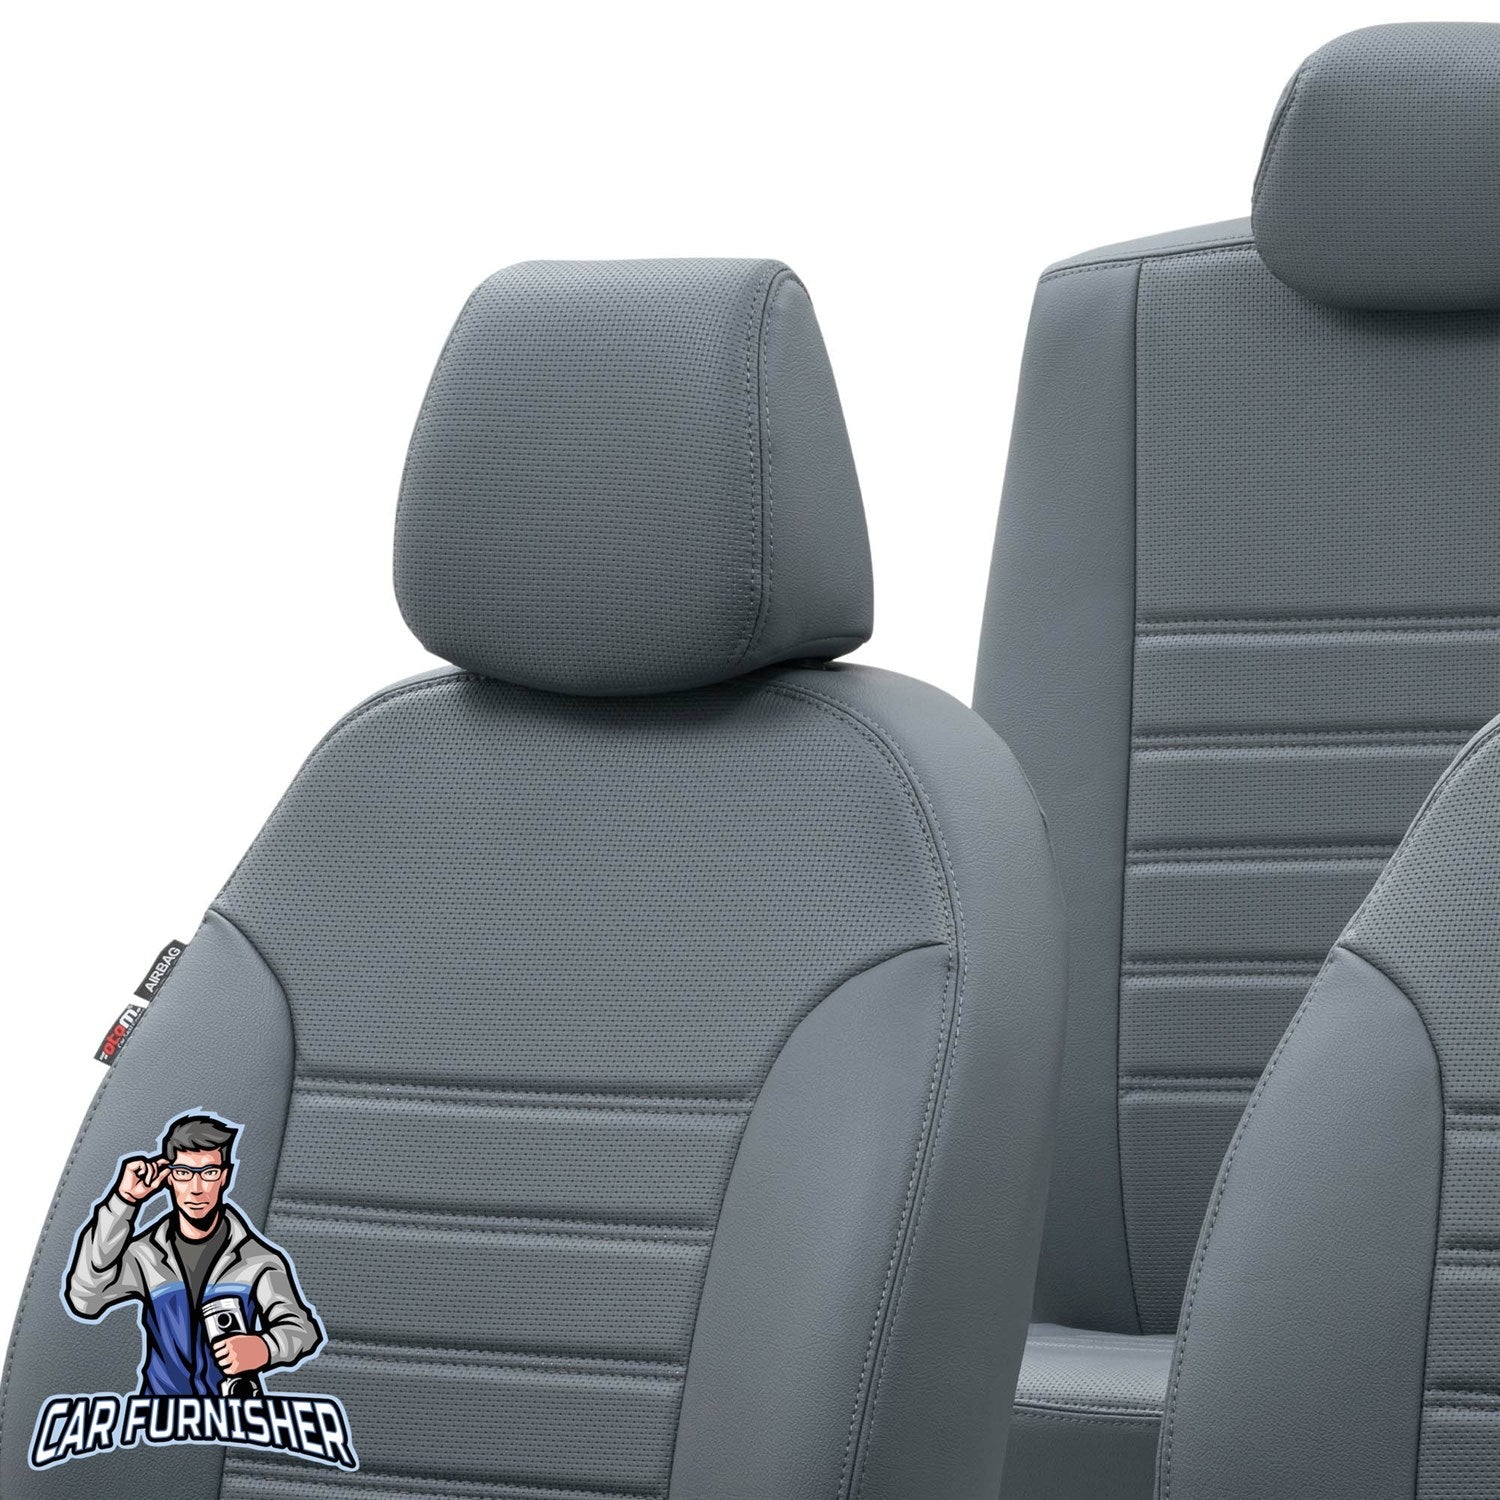 Fiat Scudo Seat Covers New York Leather Design Smoked Leather